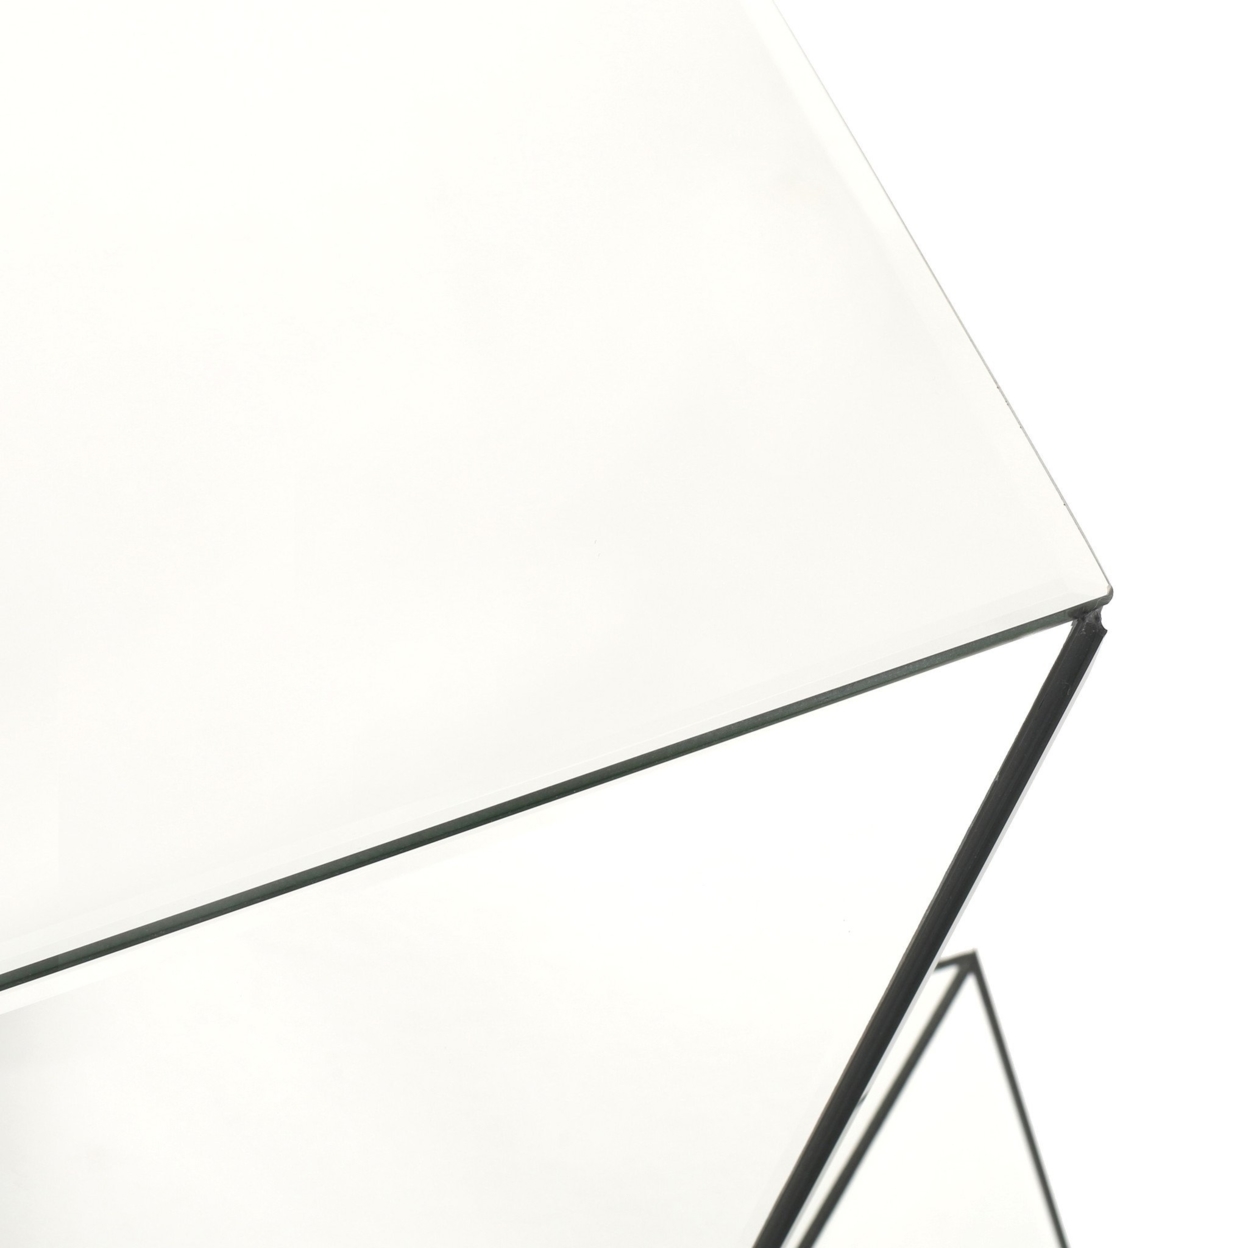 Aedon Mirrored Side Table